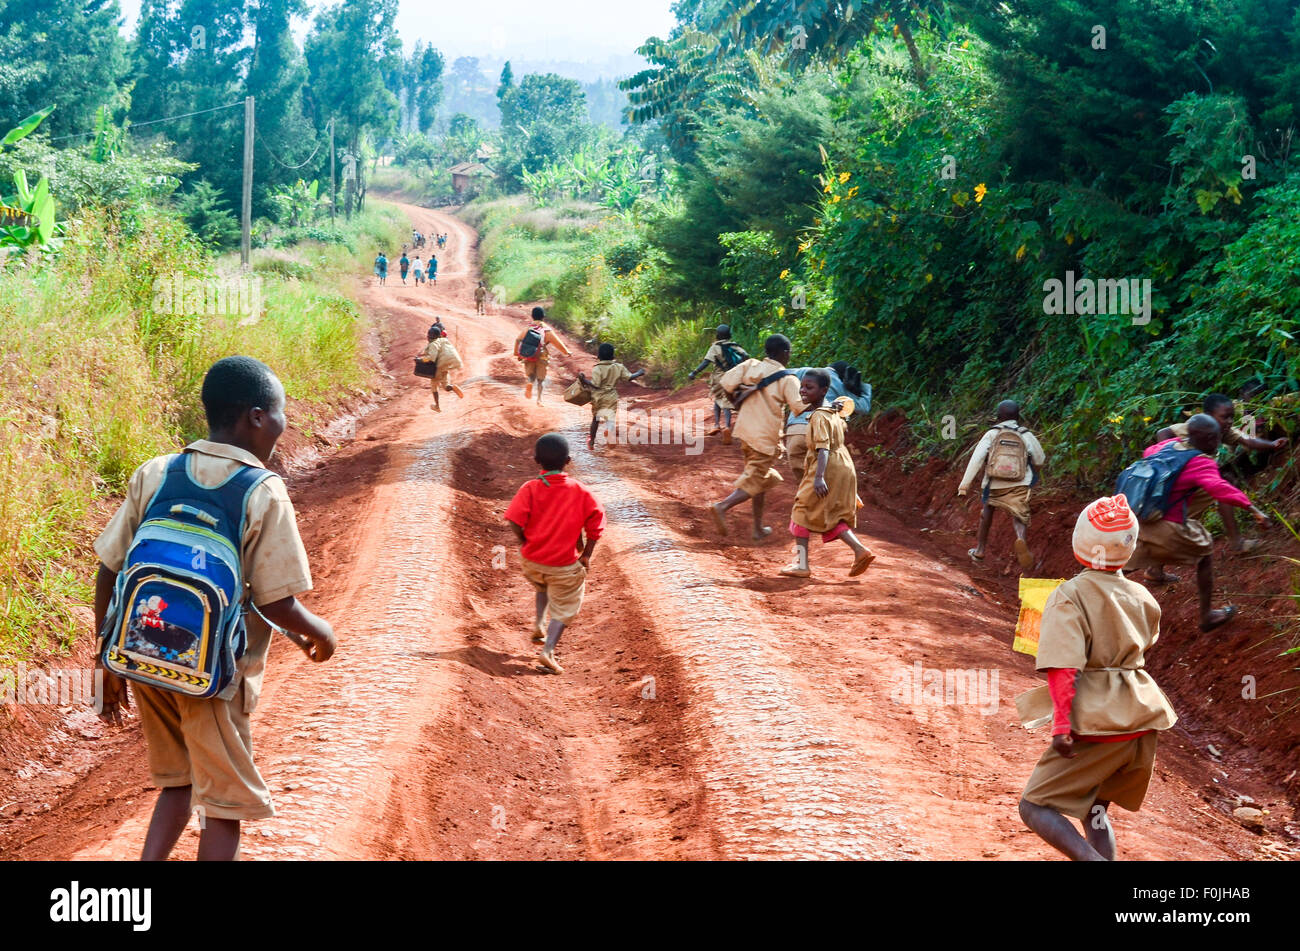 Kids running after school on a red earth dirt road in rural Africa Stock Photo